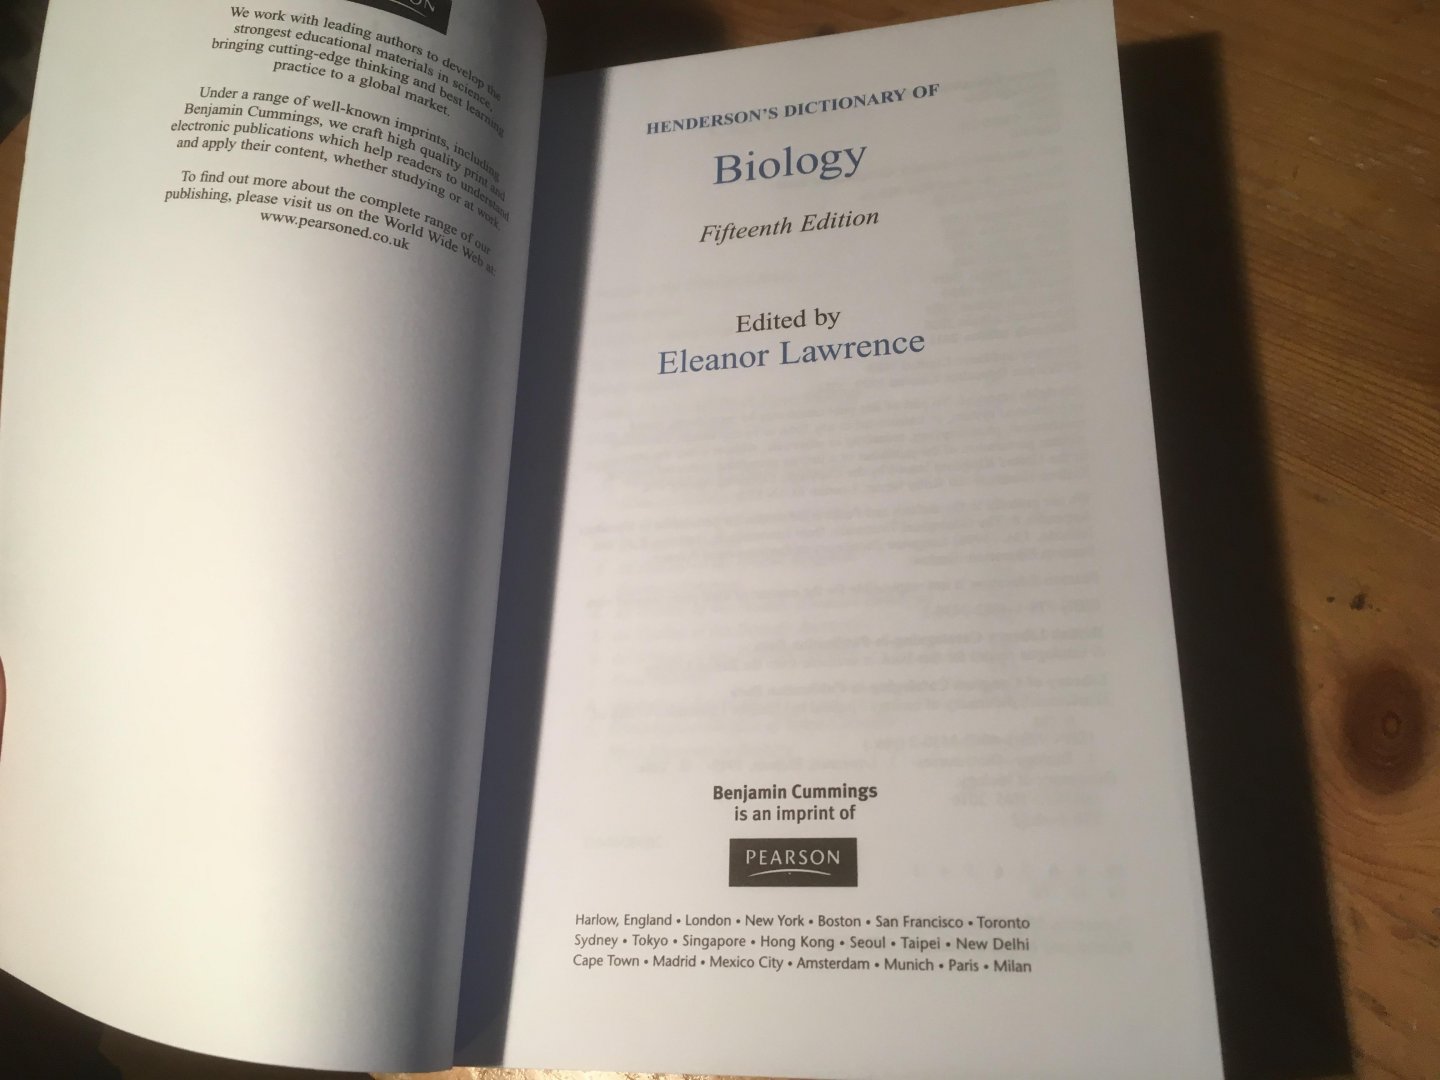 Lawrence, E & Henderson - Henderson's Dictionay of Biology - 15th ed